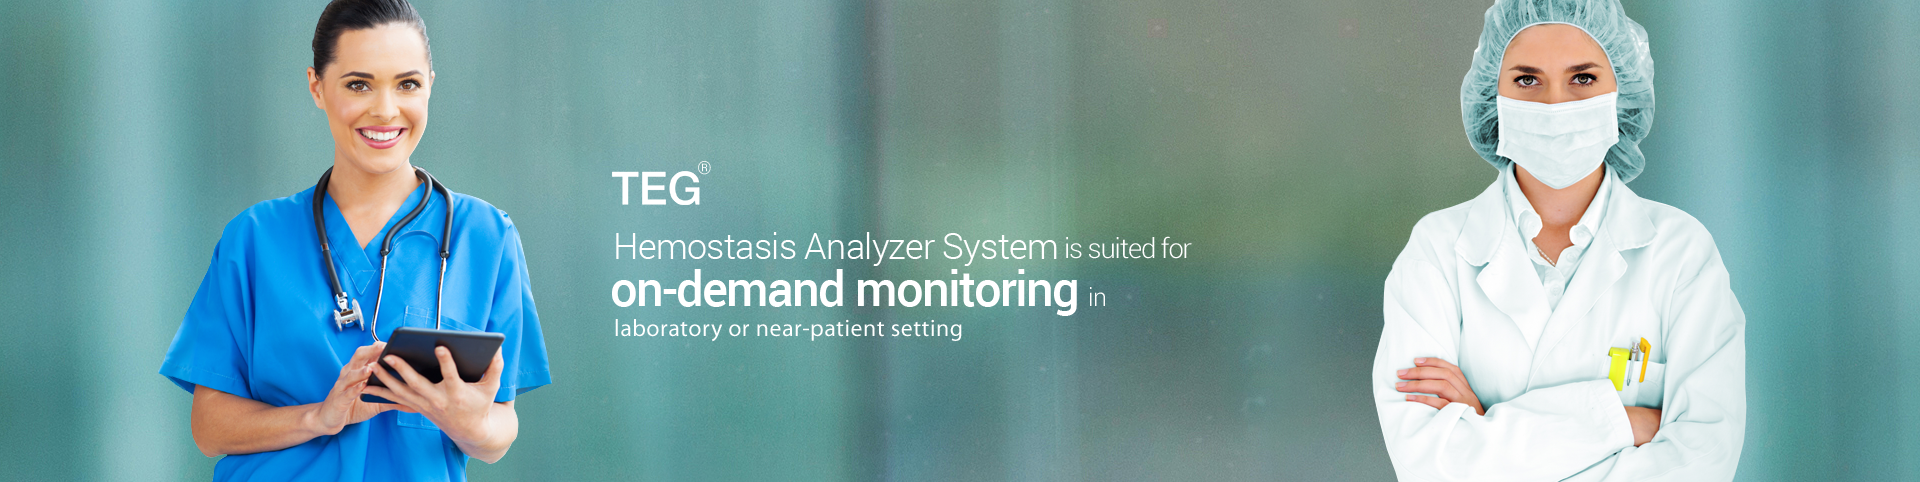 TEG Hemostasis Analyzer System is suited for on-demand monitoring in laboratory or near-patient settings